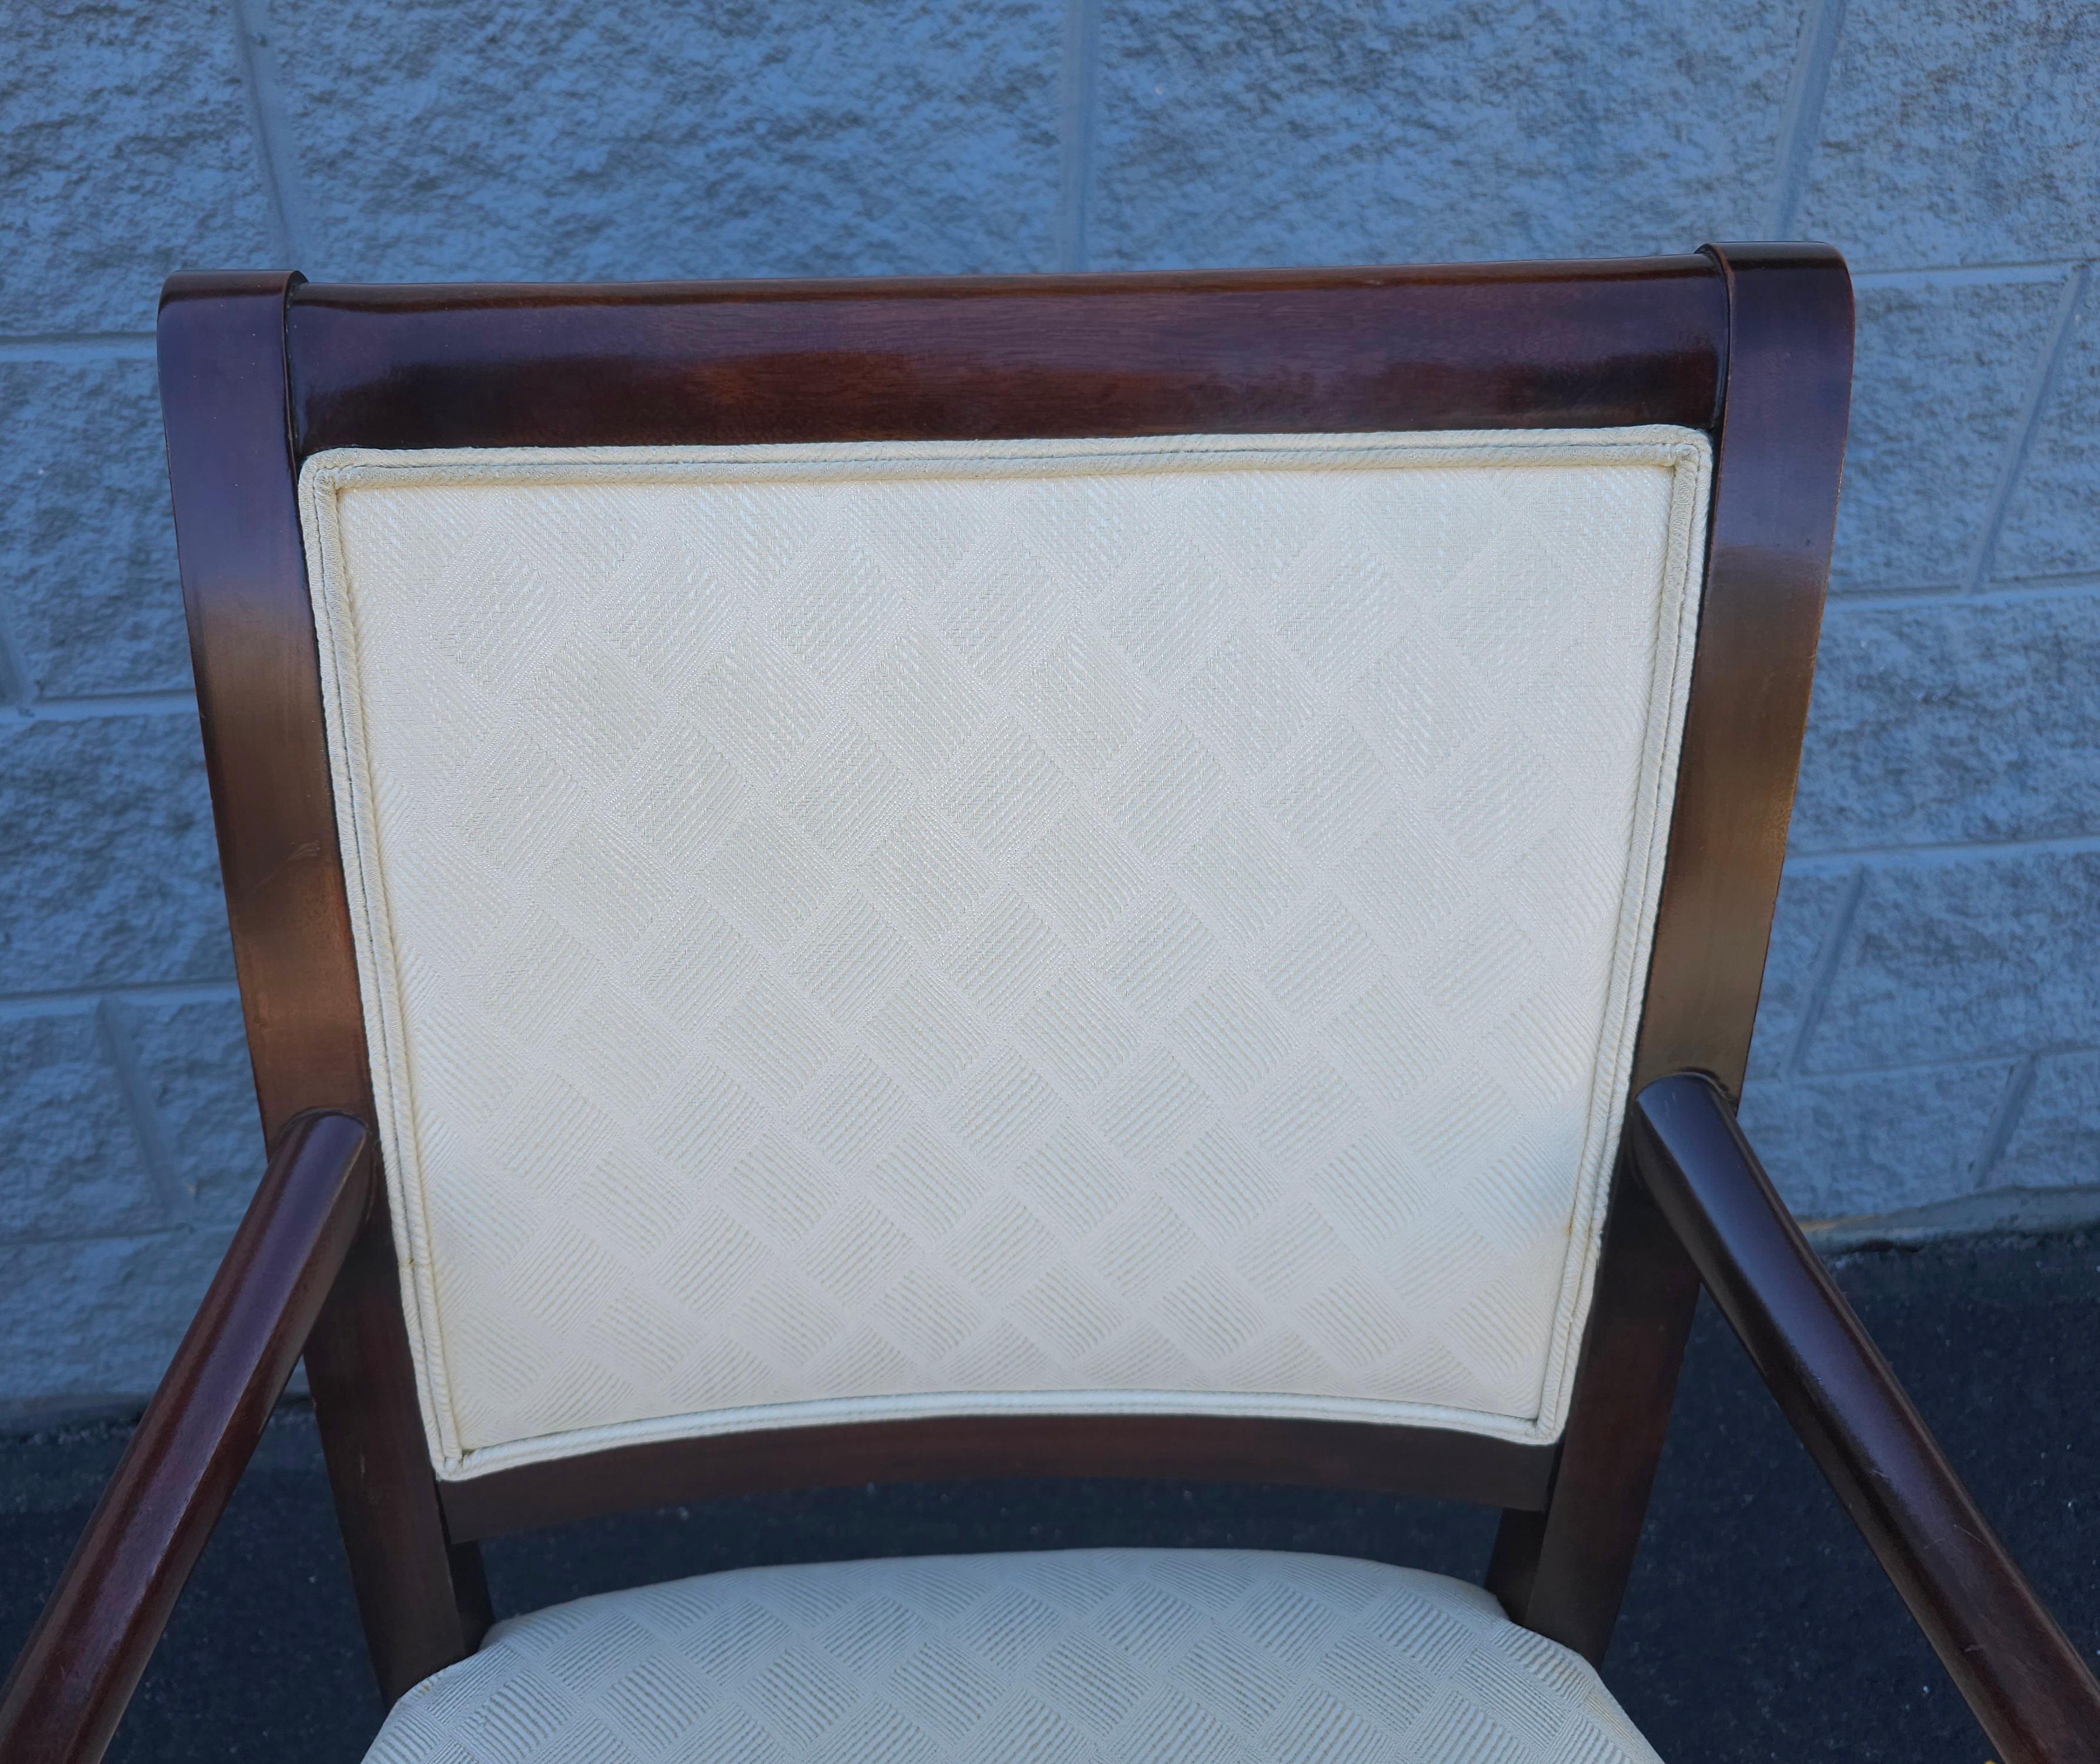 20th Century 20th C. Hickory Chair Federal Style Mahogany Inlaid and Upholstered Arm Chair For Sale